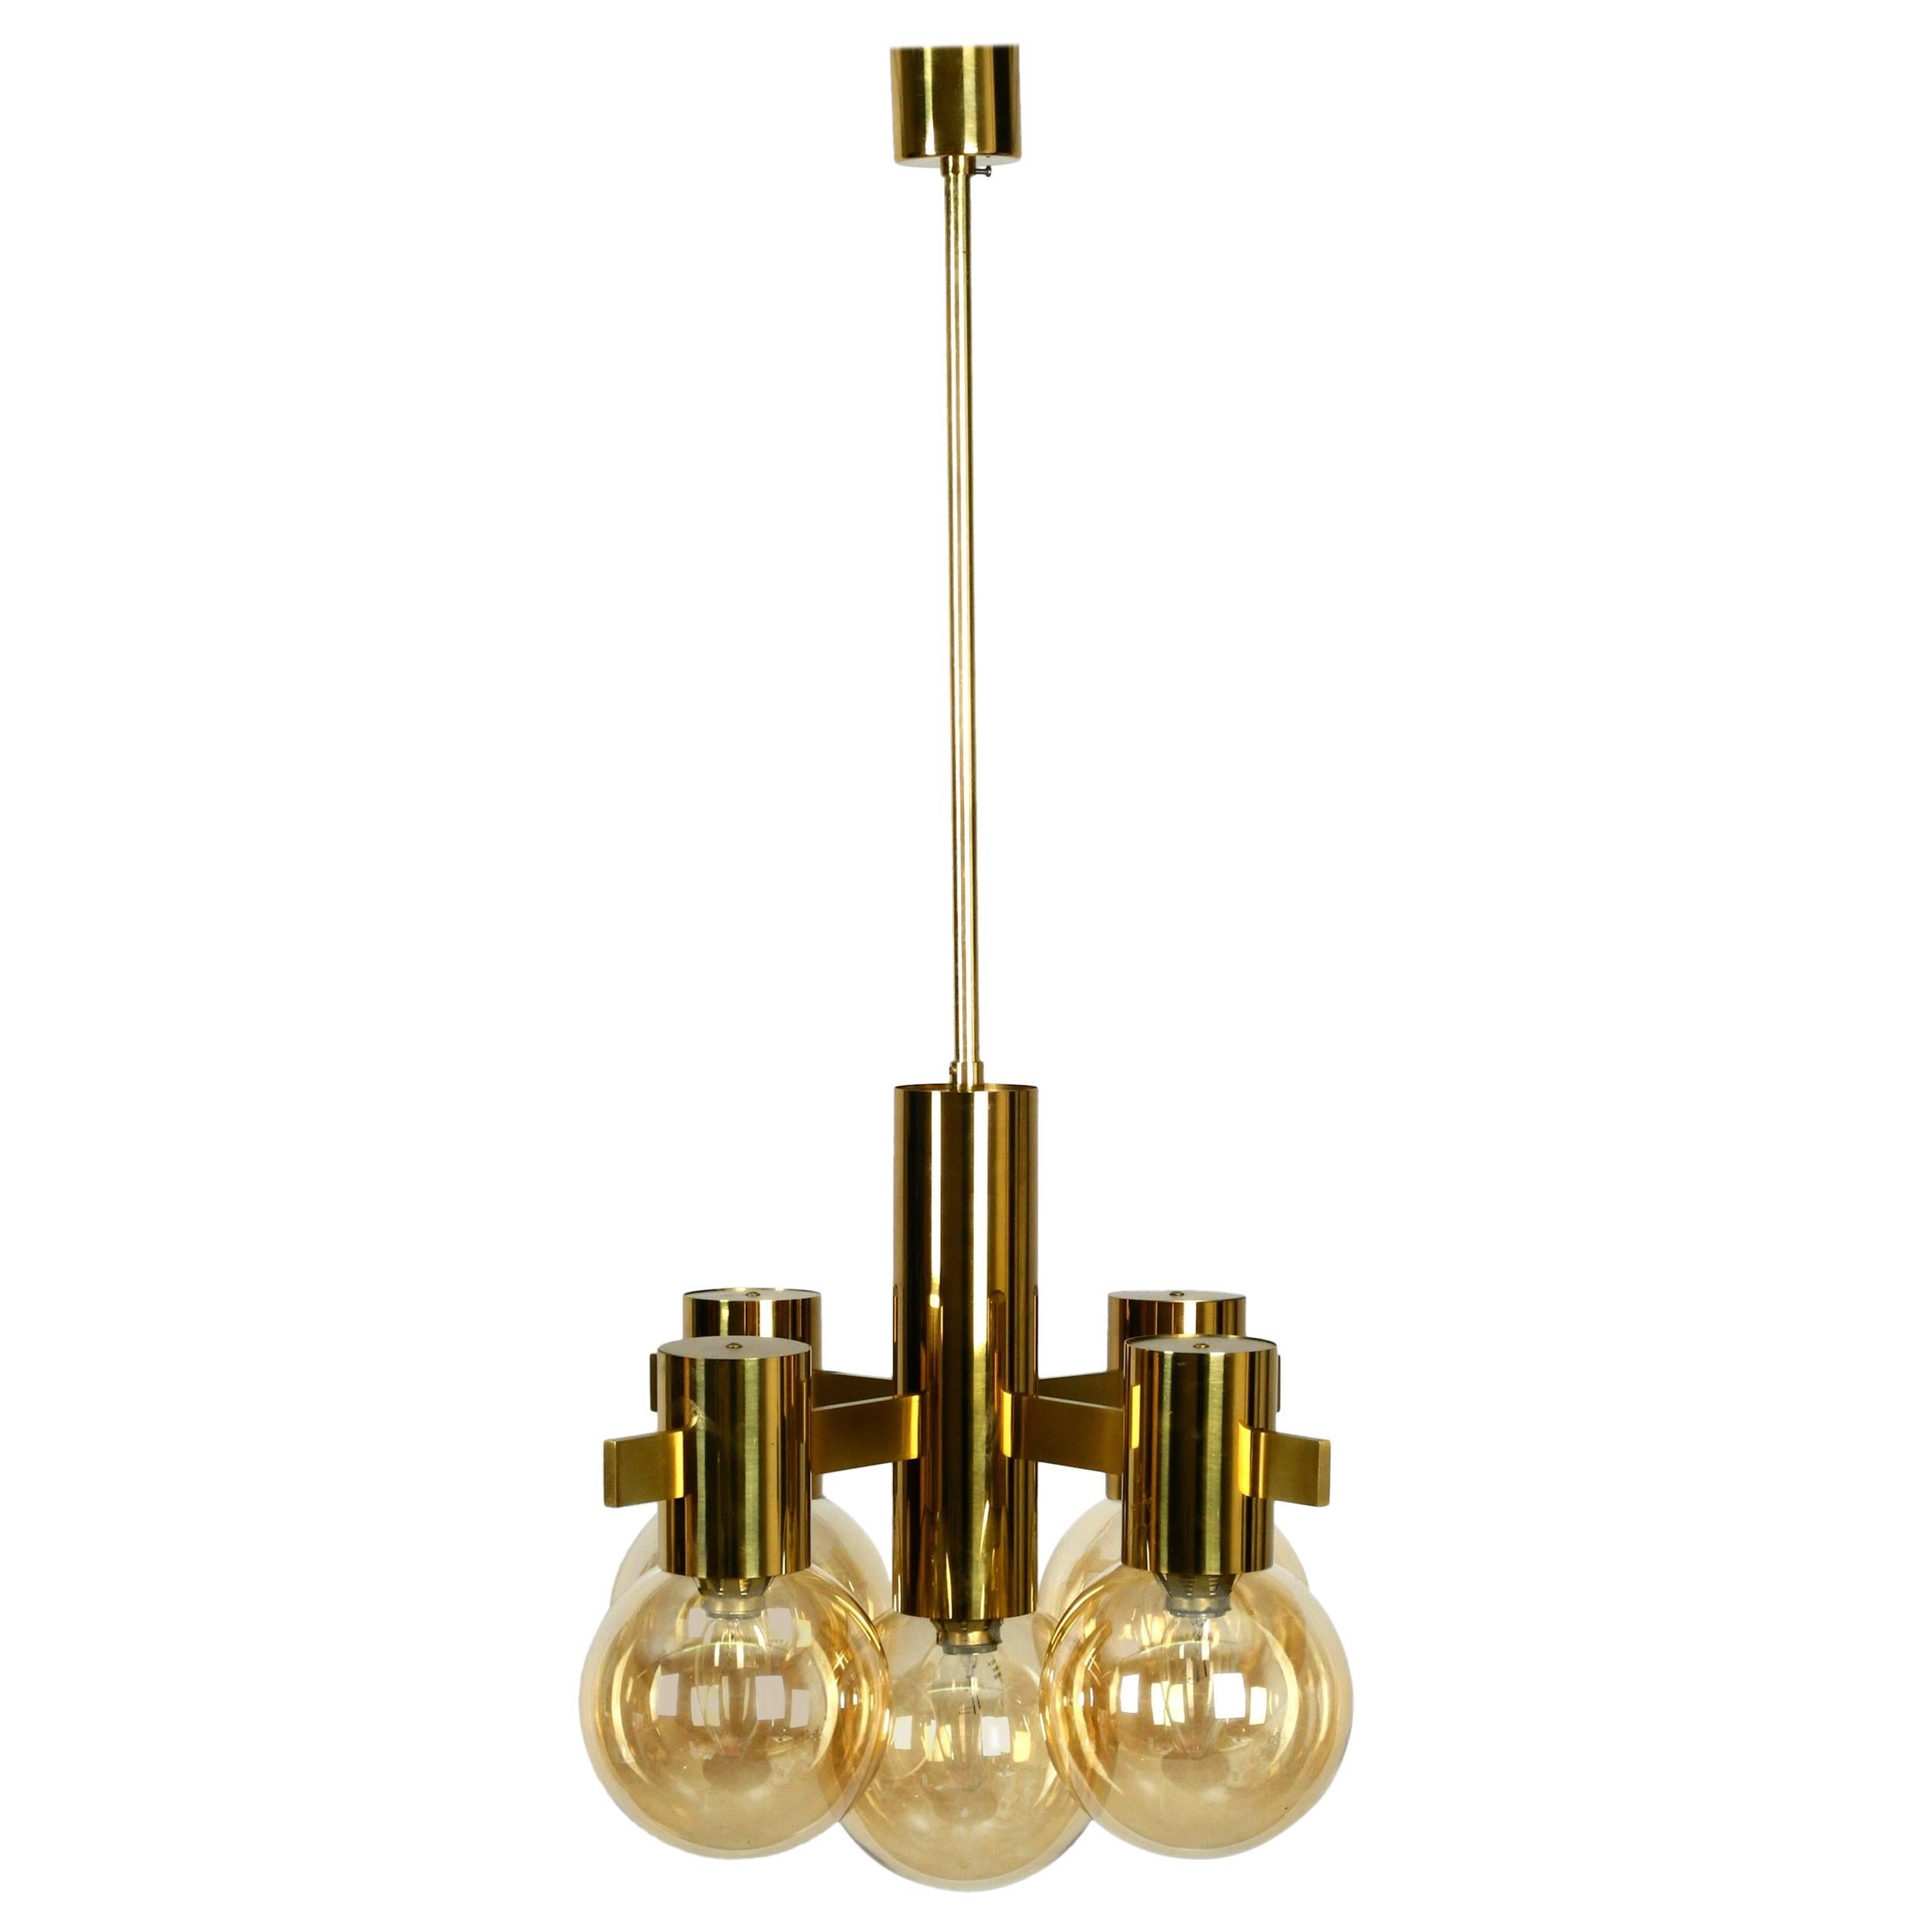 Beautiful 1960s Brass Ceiling Lamp by Hans Agne Jakobsson with 5 Glass Balls